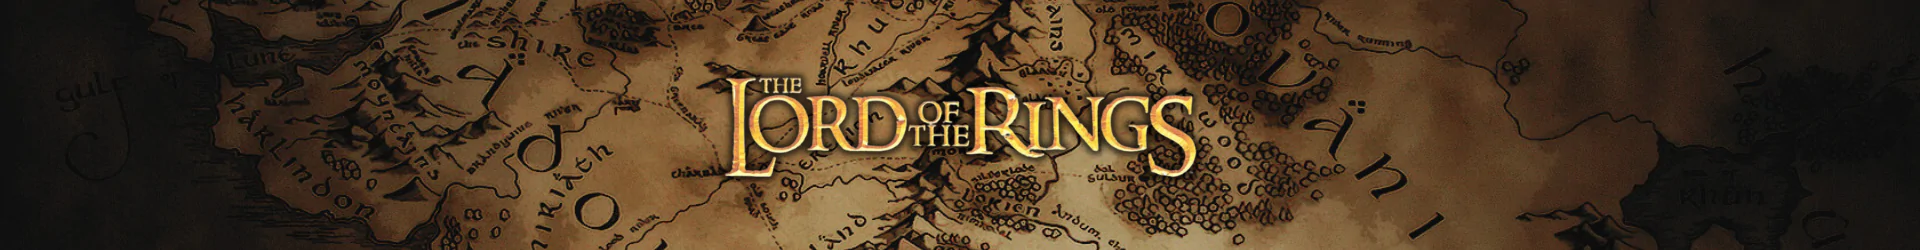 Lord of the Rings bottles banner